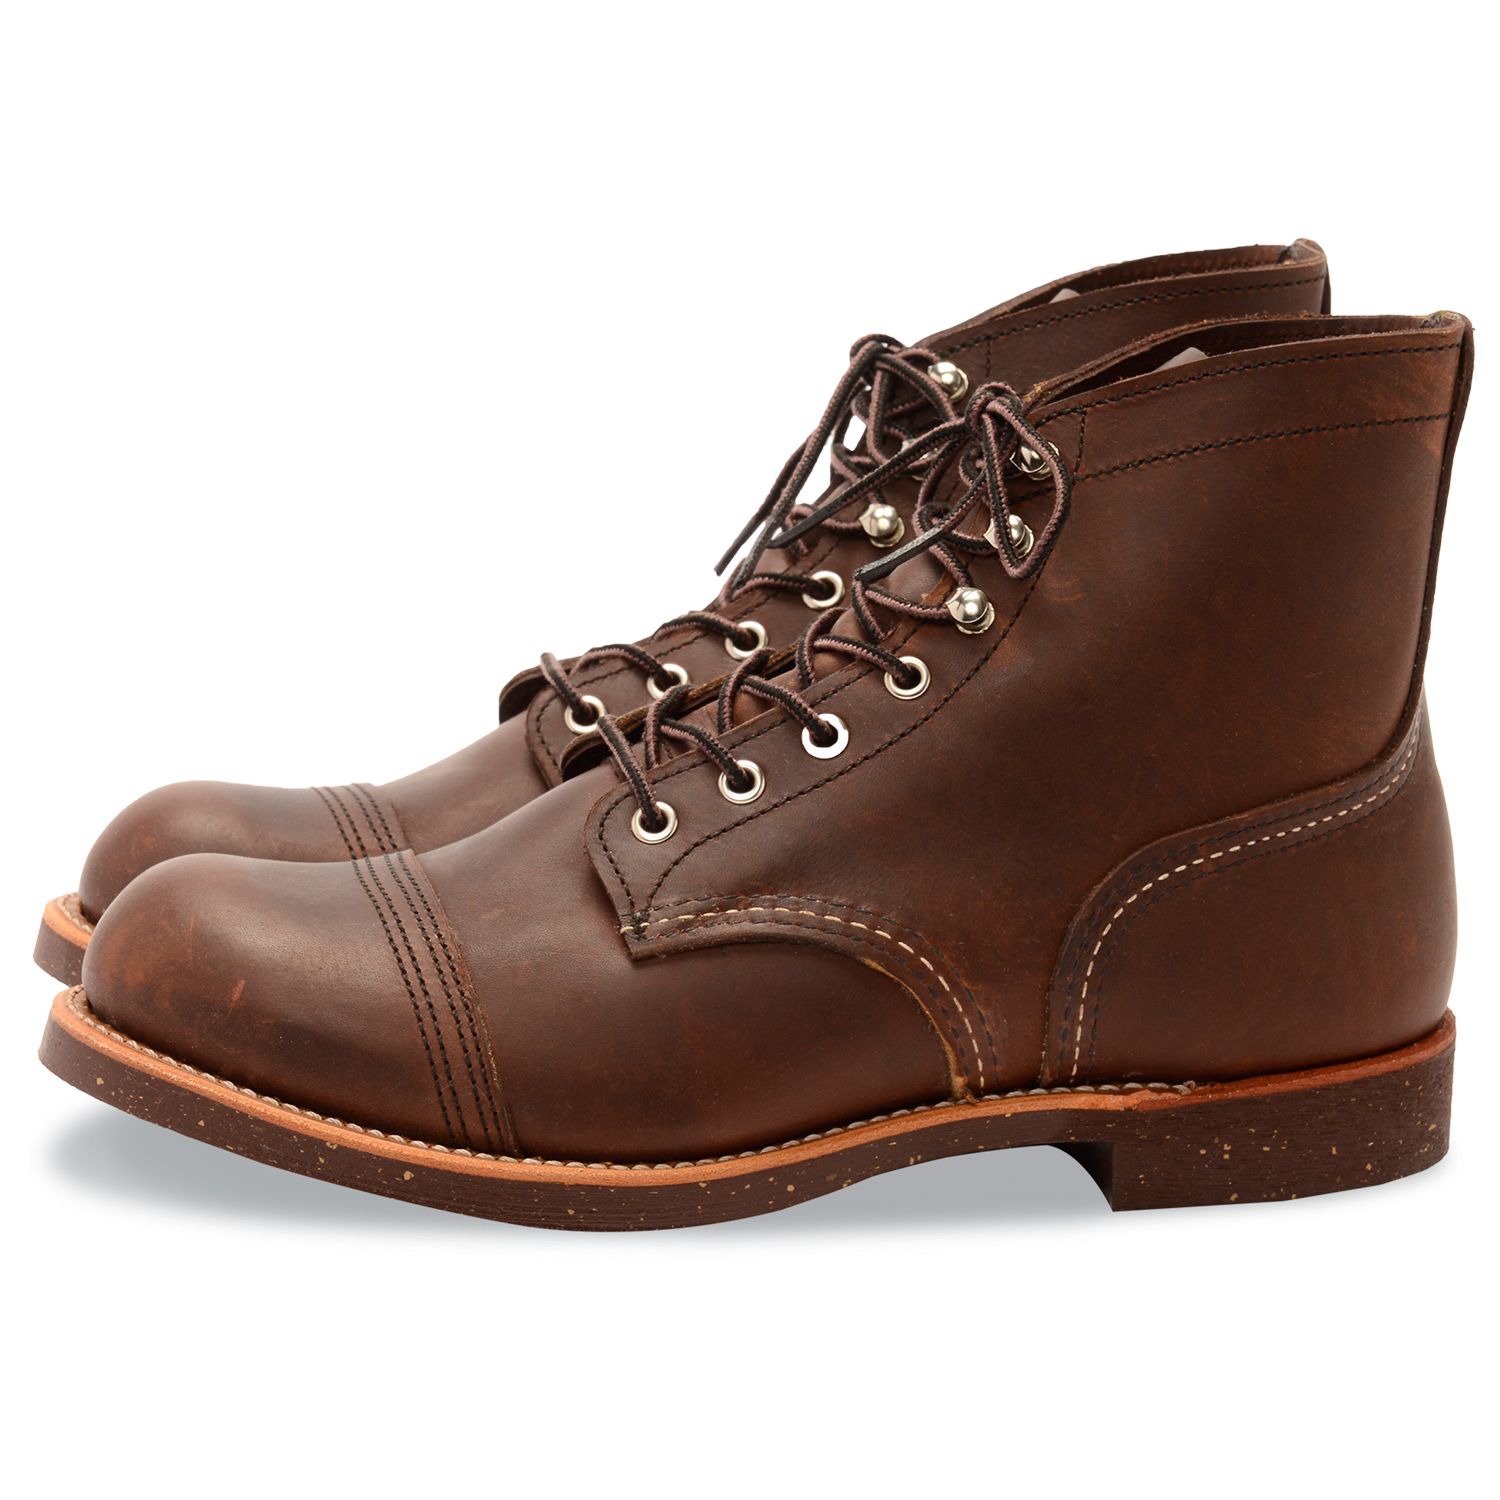 Red Wing 8111 Iron Ranger Boots, Amber Harness at John Lewis & Partners